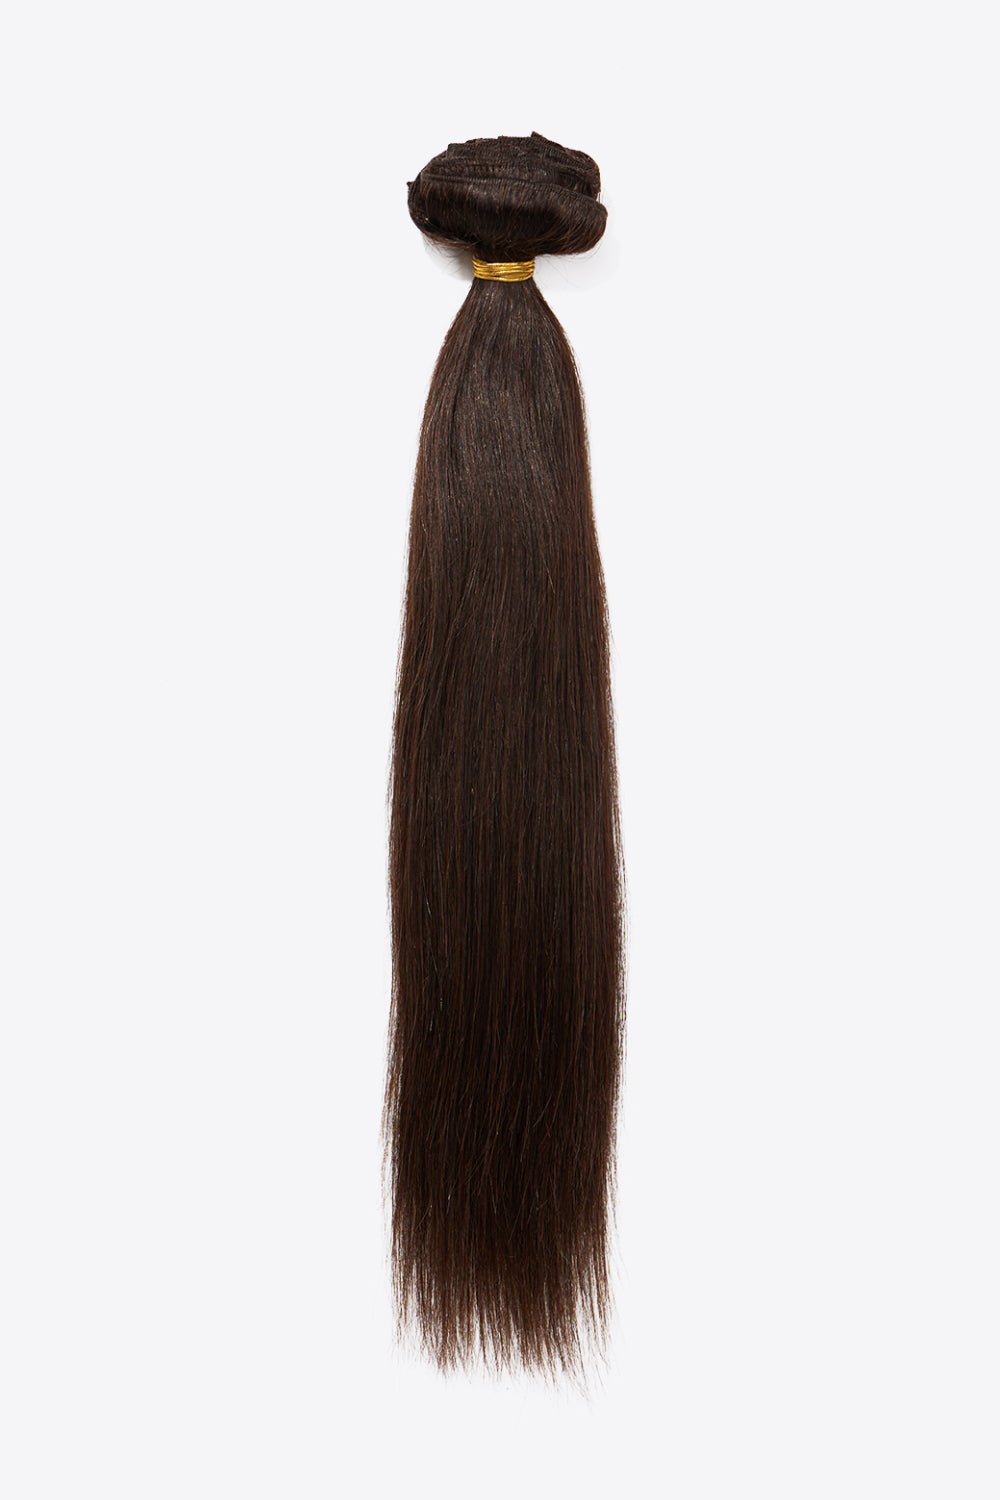 18" 200g #2 Natural Clip-in Hair Extension Human Hair - TJ Outlet